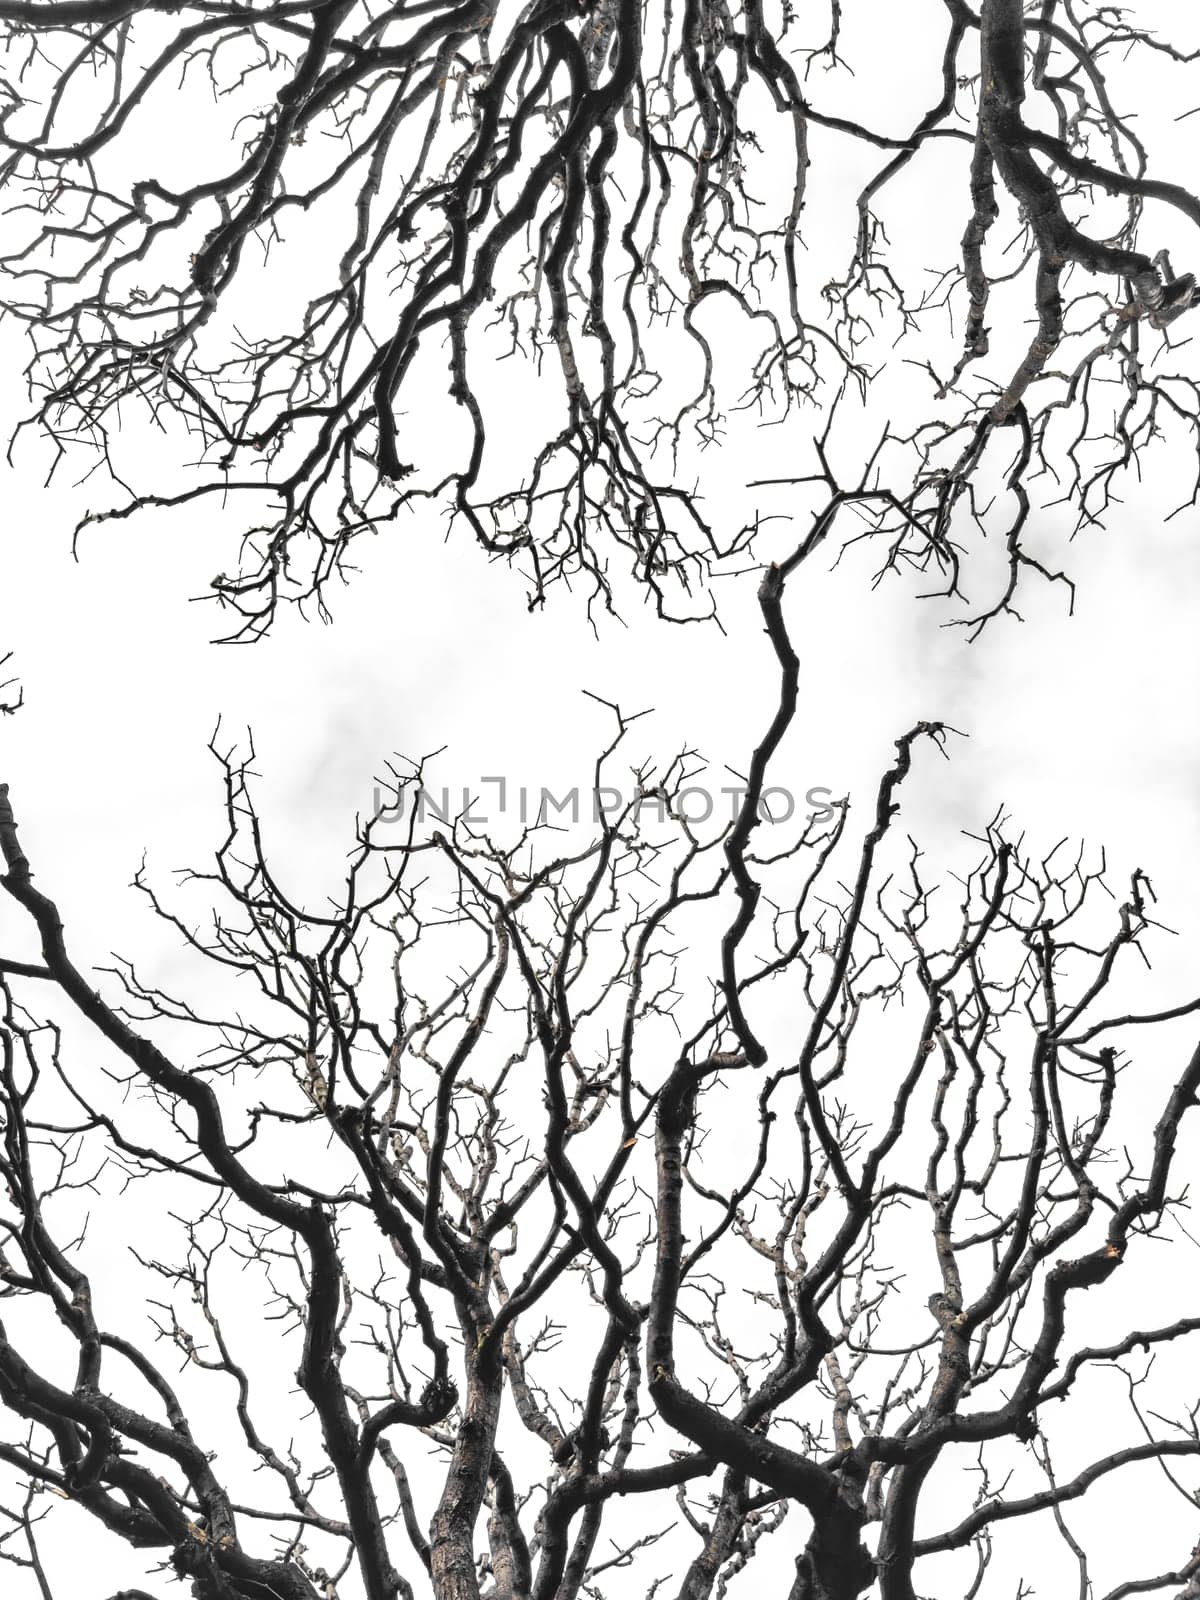 Bare tree branches similar in shape to a thunderstorm, branches against the sky, sadness and depression by vladimirdrozdin